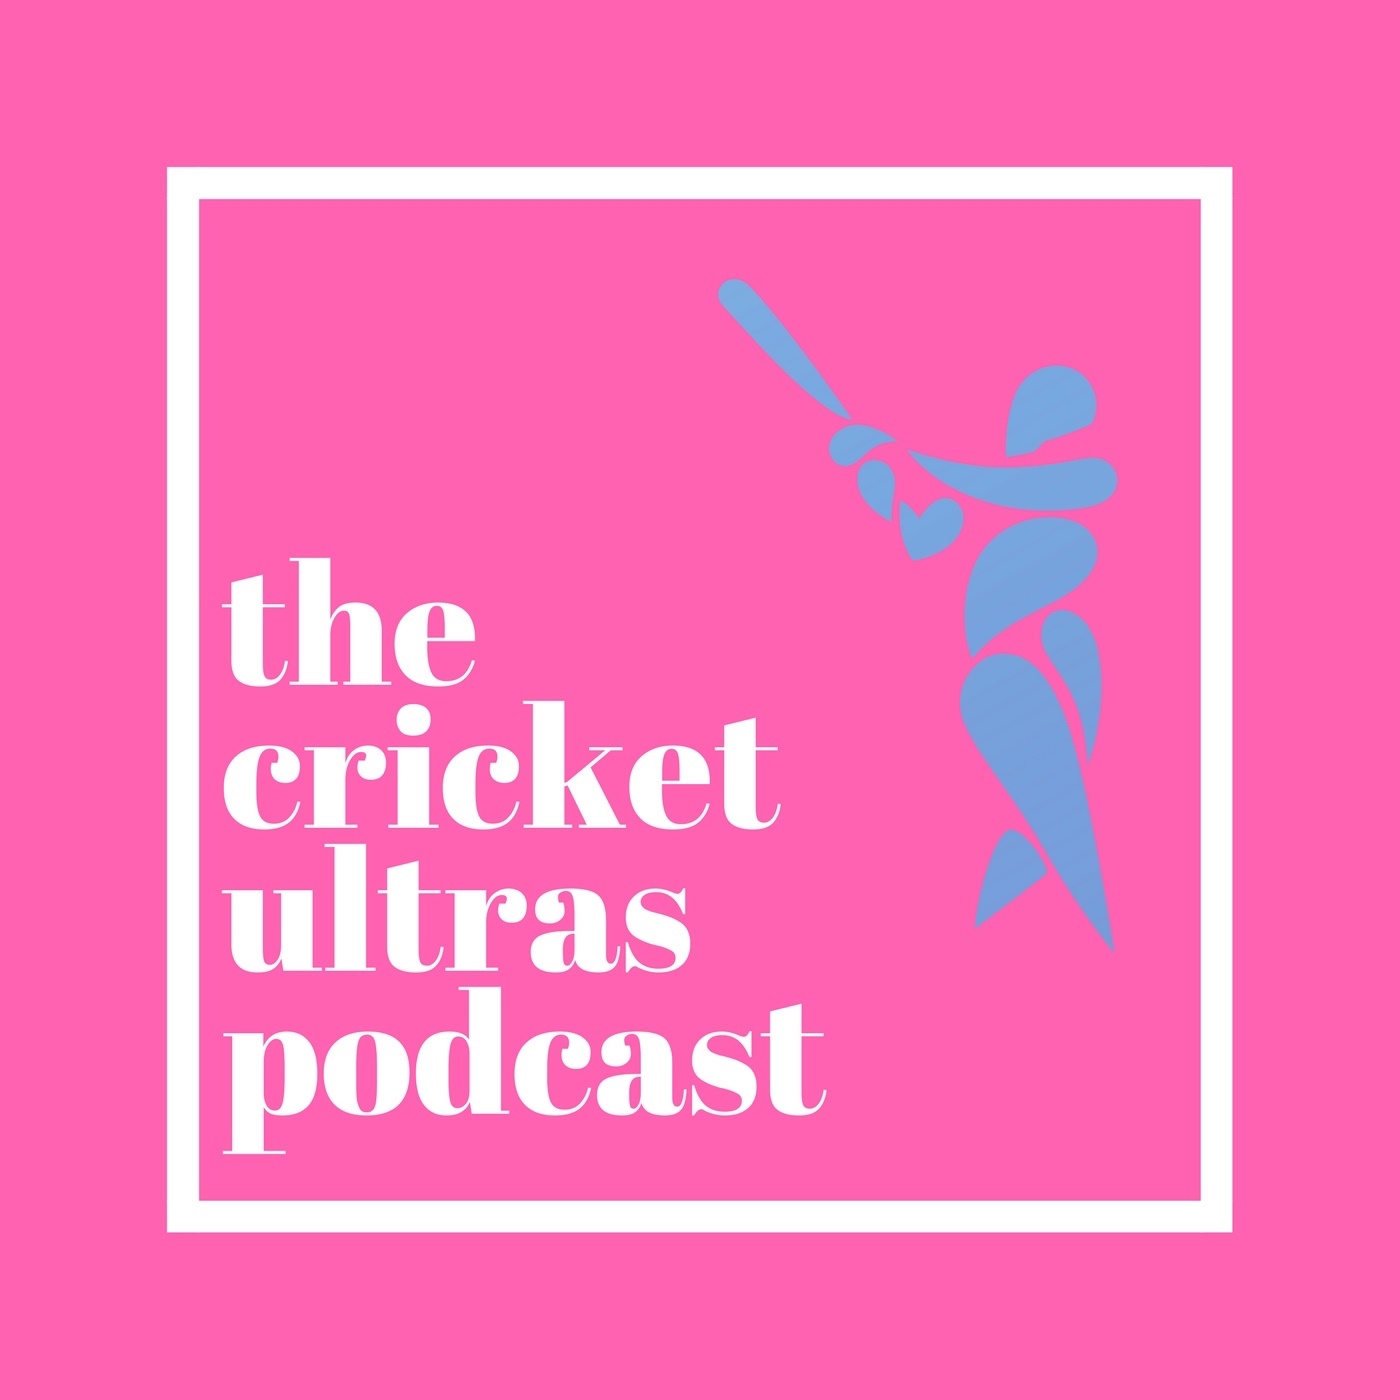 Ep 9: SA fold, Aus misbehave, T20 curbs, WC Qualifier explained, Billy Stanlake, HK’s finest & more